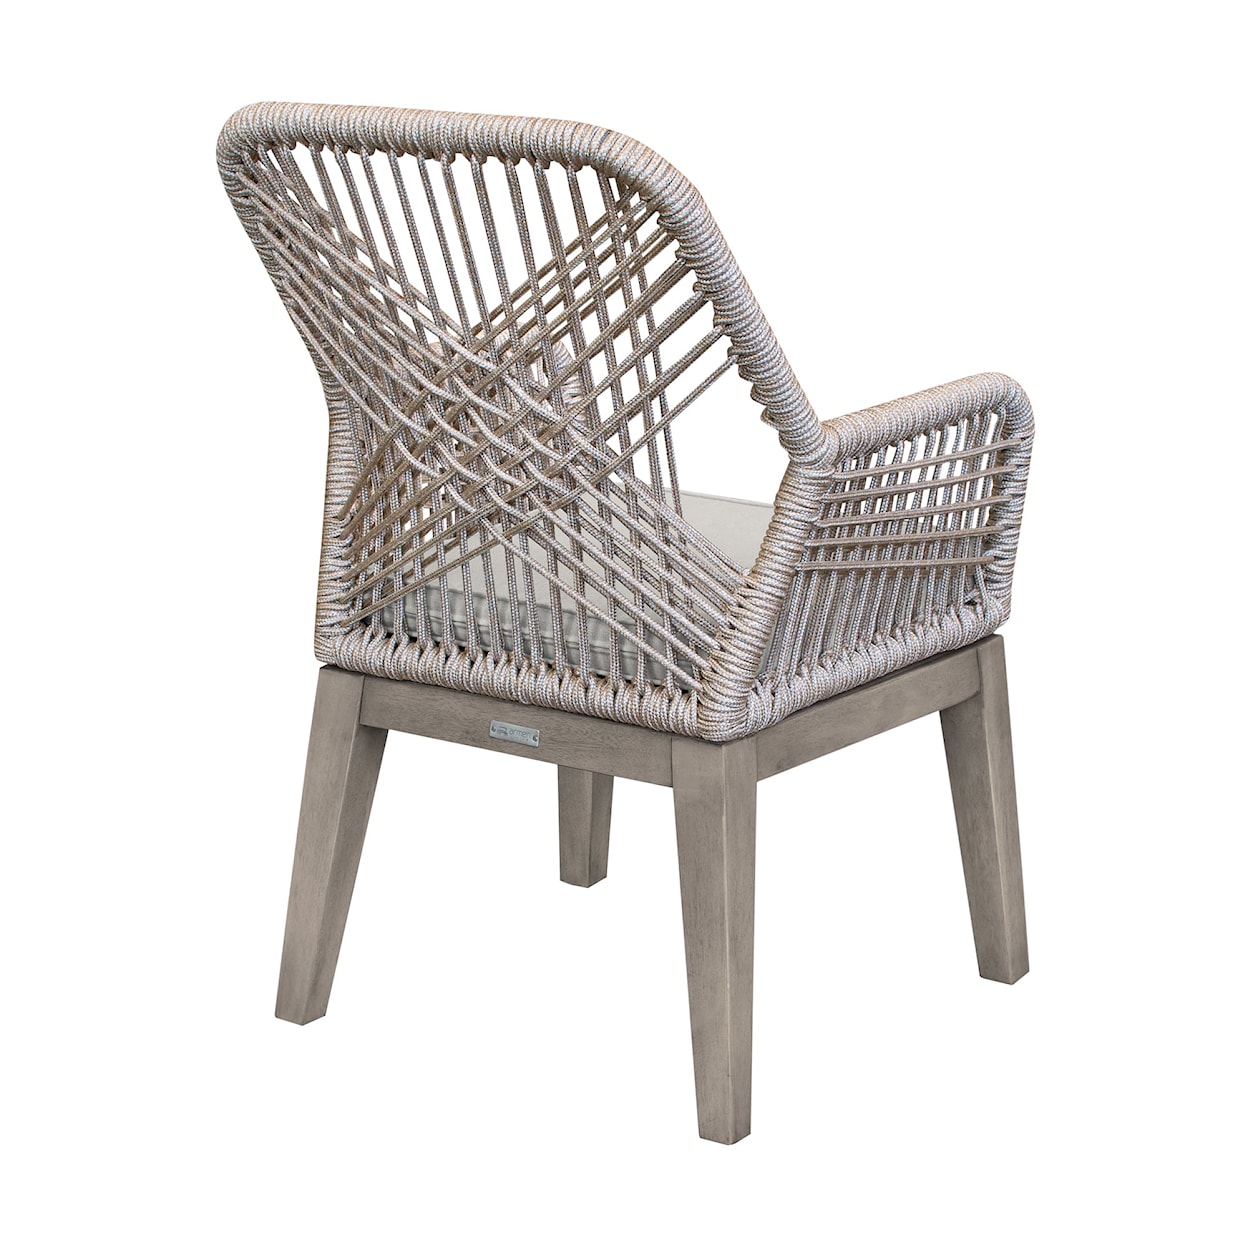 Armen Living Costa Set of 2 Outdoor Arm Chairs